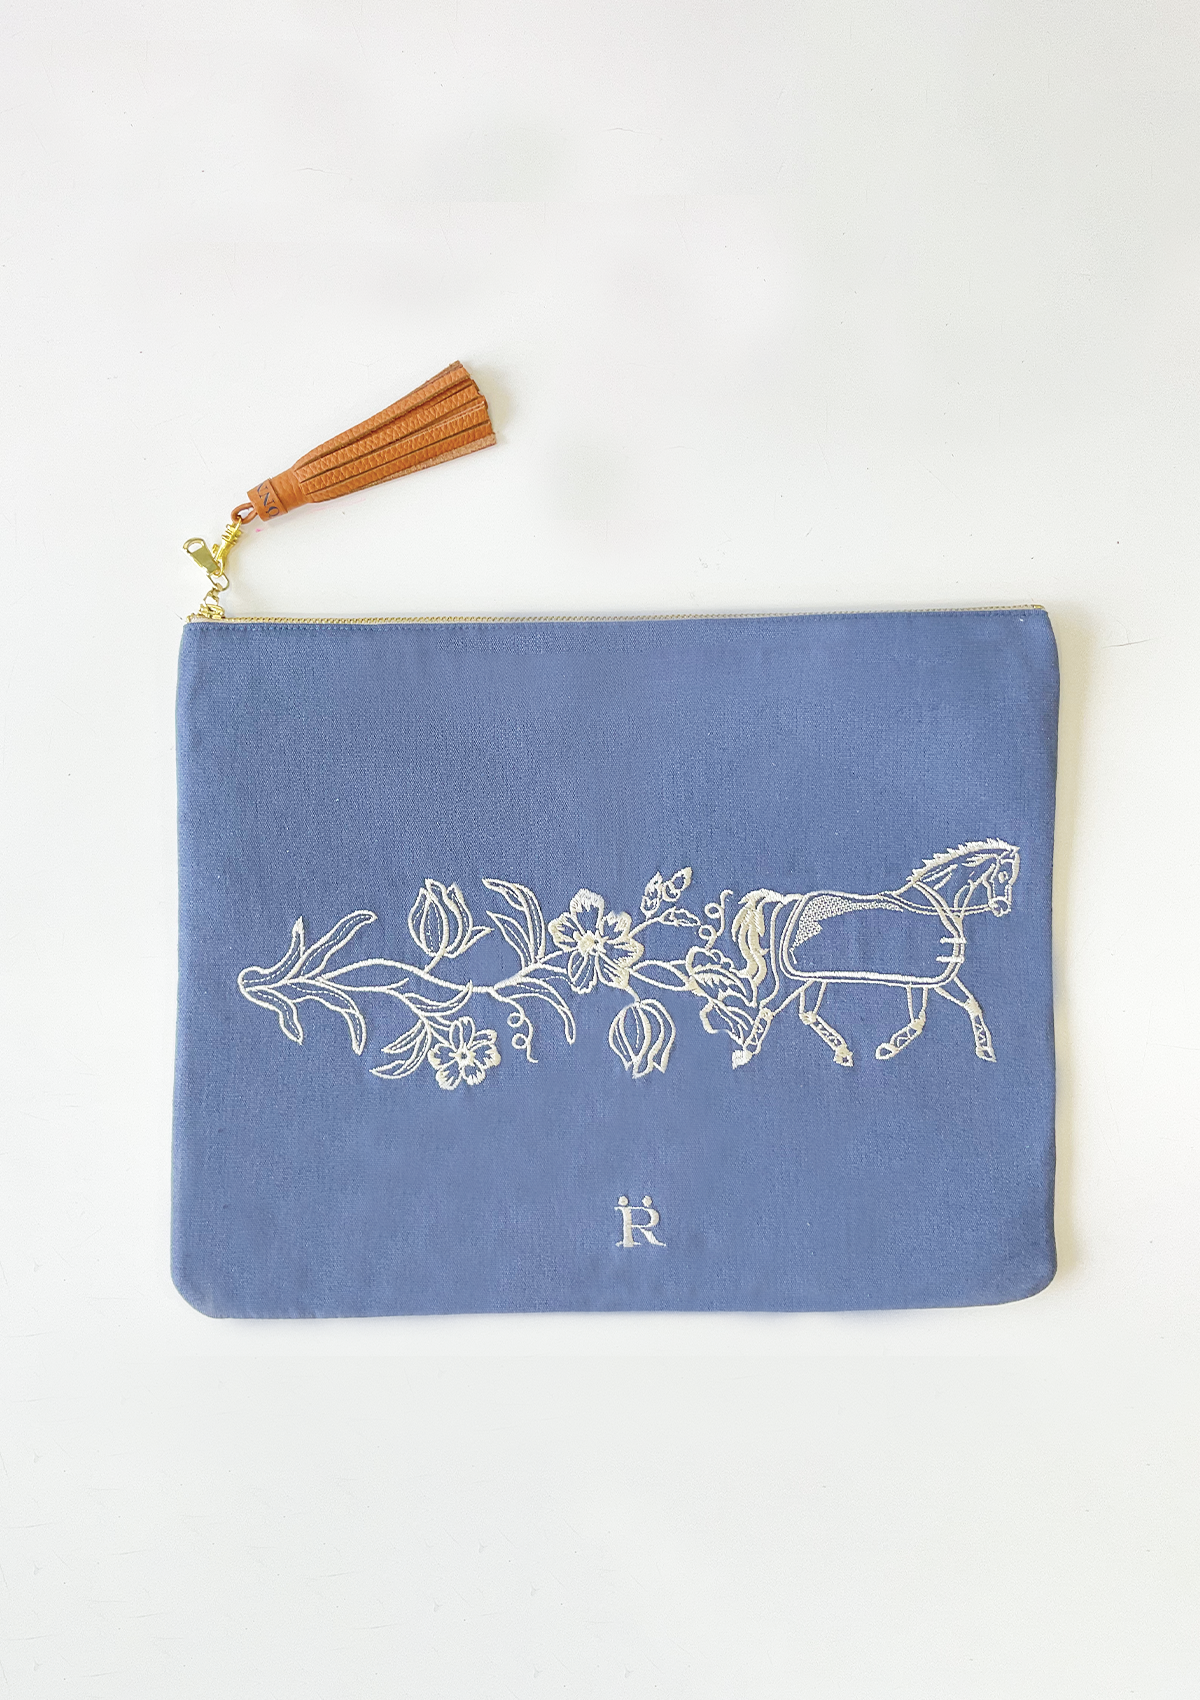 Dancing Horses Embroidered Pouch - Rönner